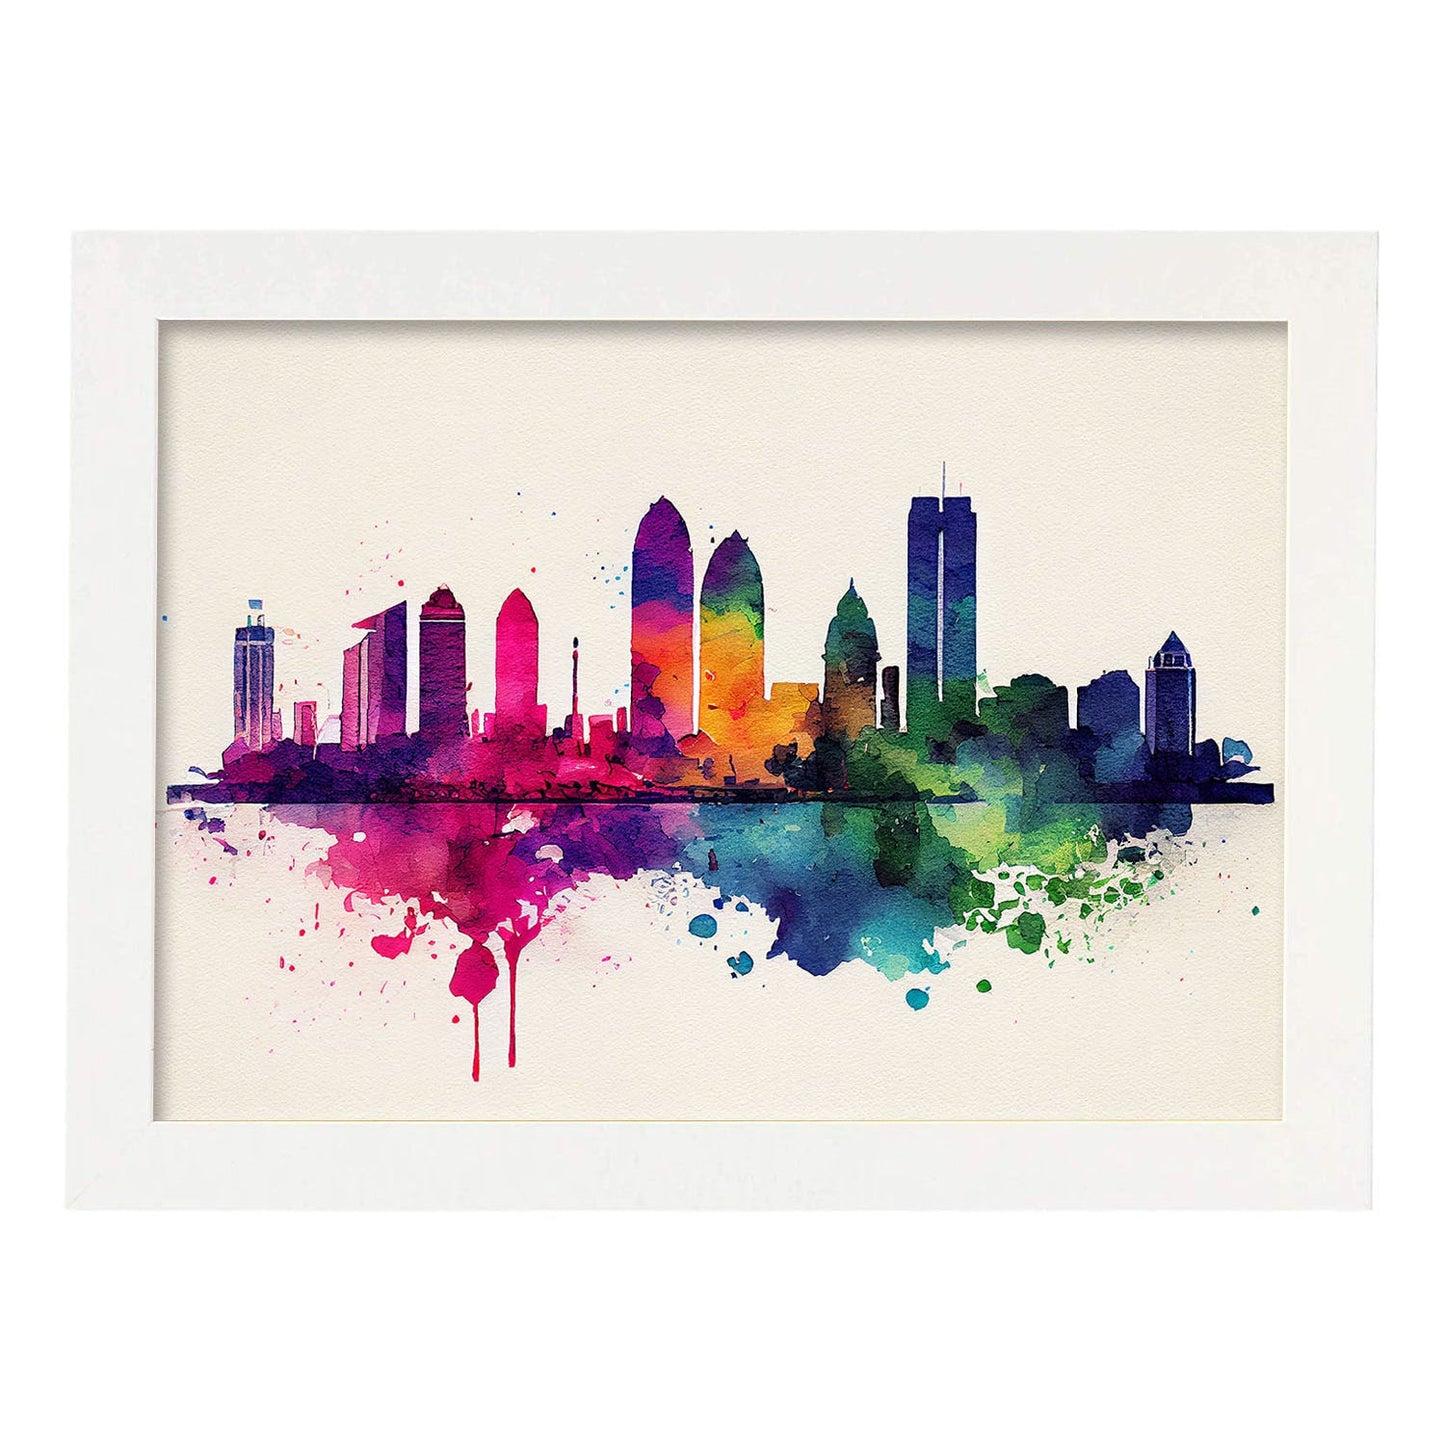 Nacnic watercolor of a skyline of the city of Cancun_1. Aesthetic Wall Art Prints for Bedroom or Living Room Design.-Artwork-Nacnic-A4-Marco Blanco-Nacnic Estudio SL